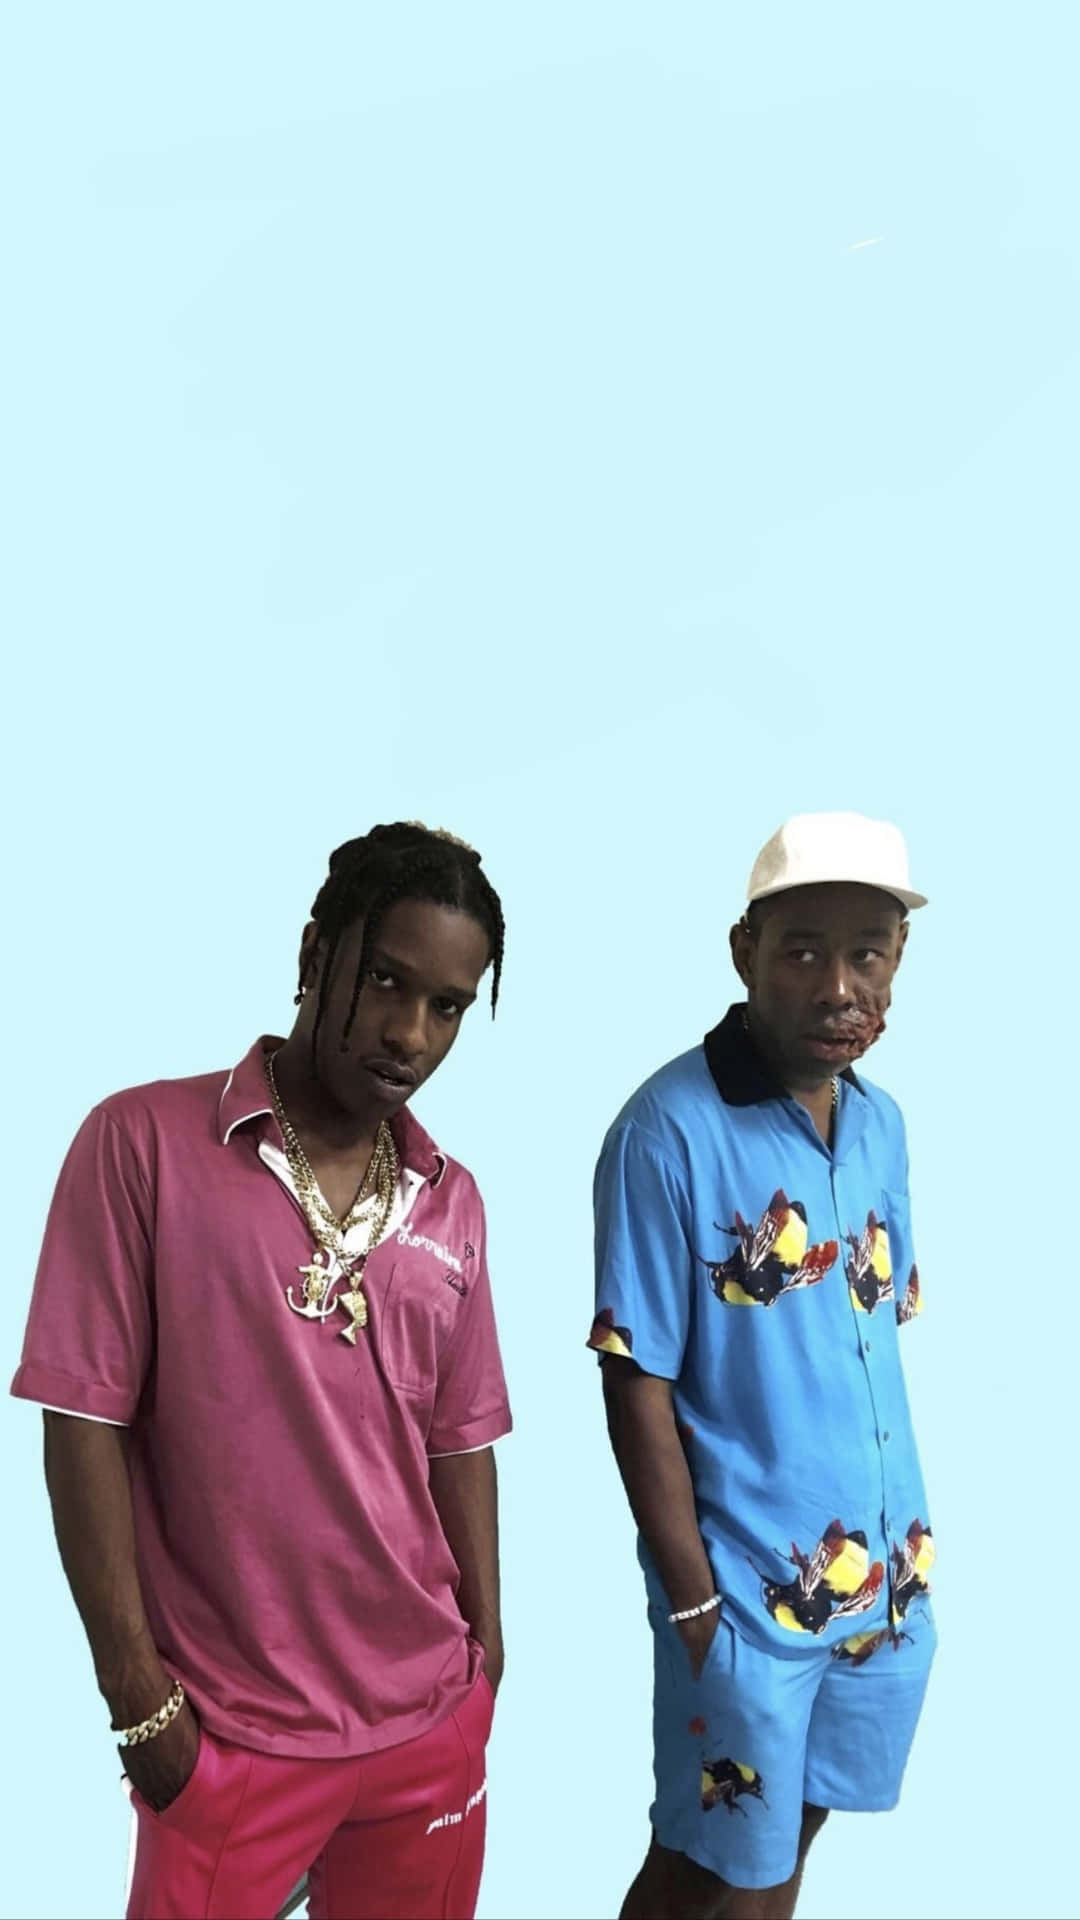 ASAP Rocky and Tyler the Creator Pose Together Wallpaper